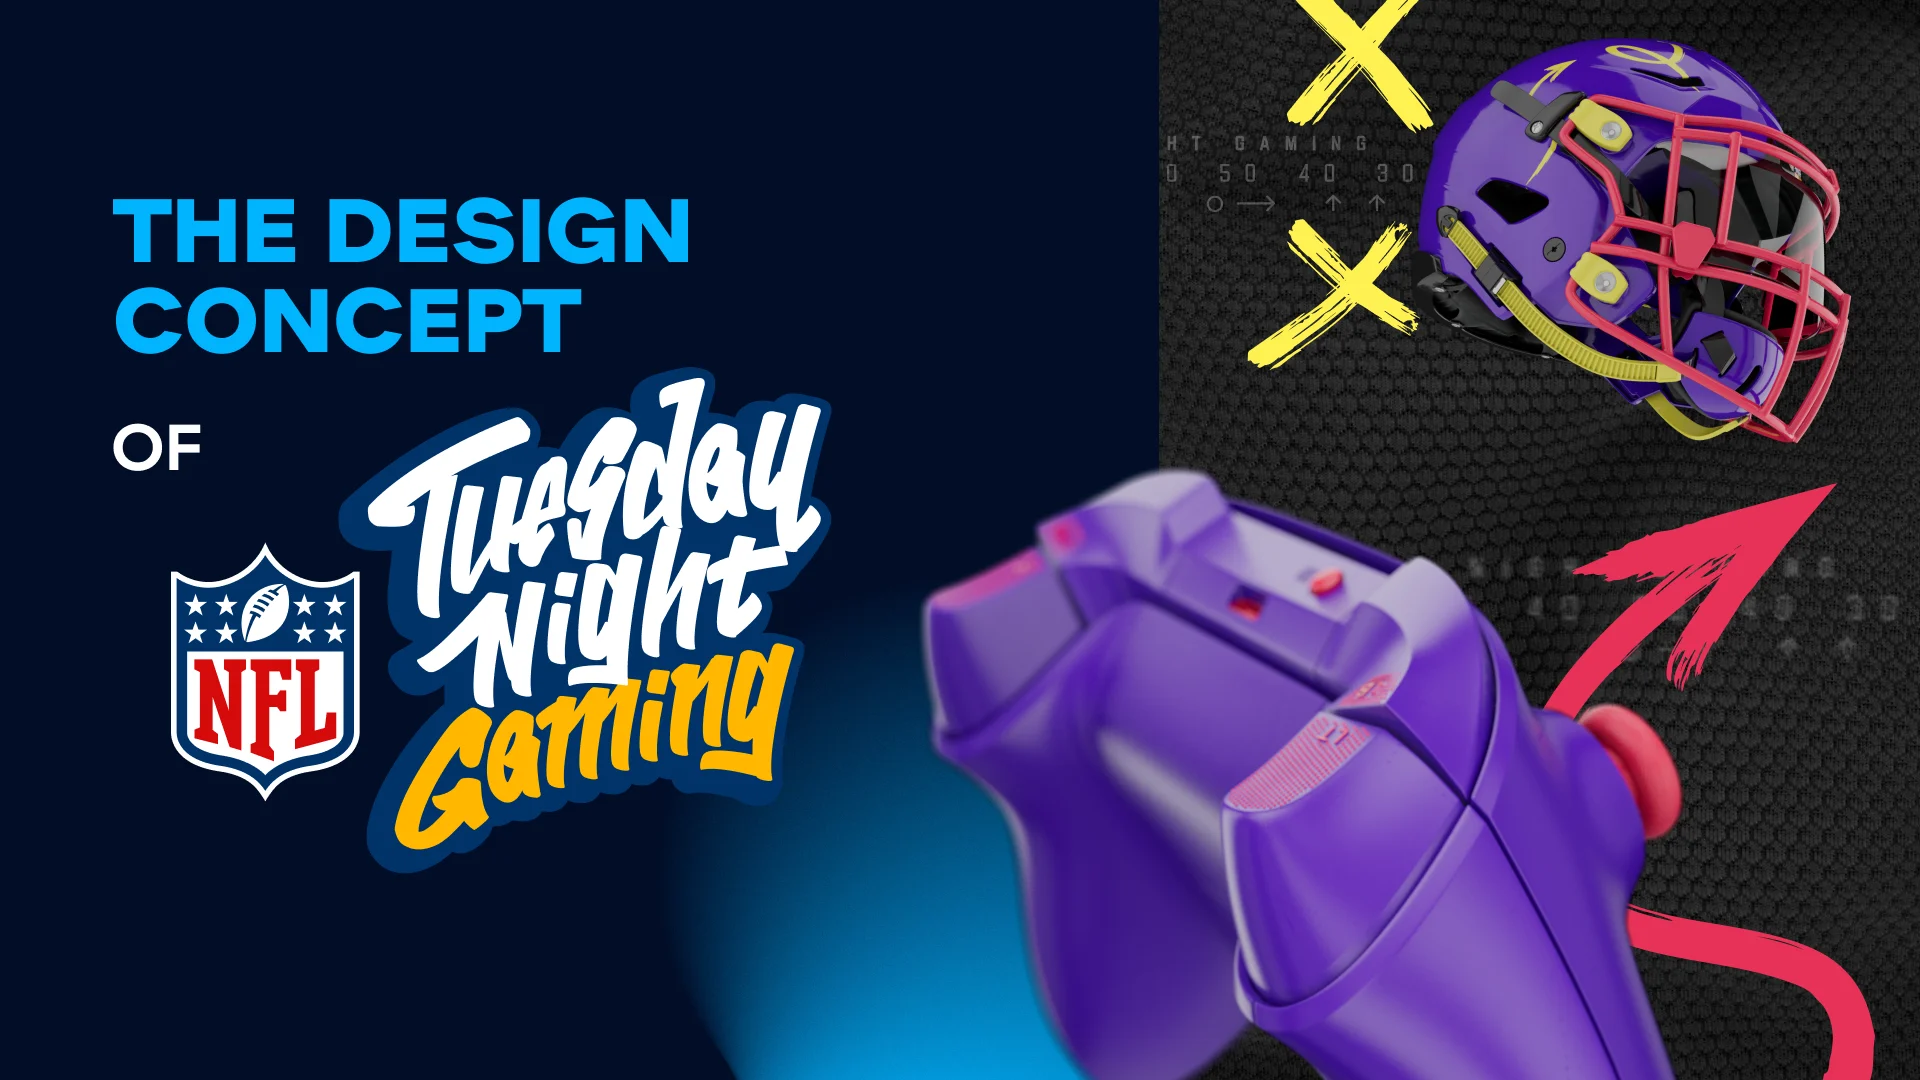 The design concept of NFL Tuesday Night Gaming. Visual: WePlay Holding